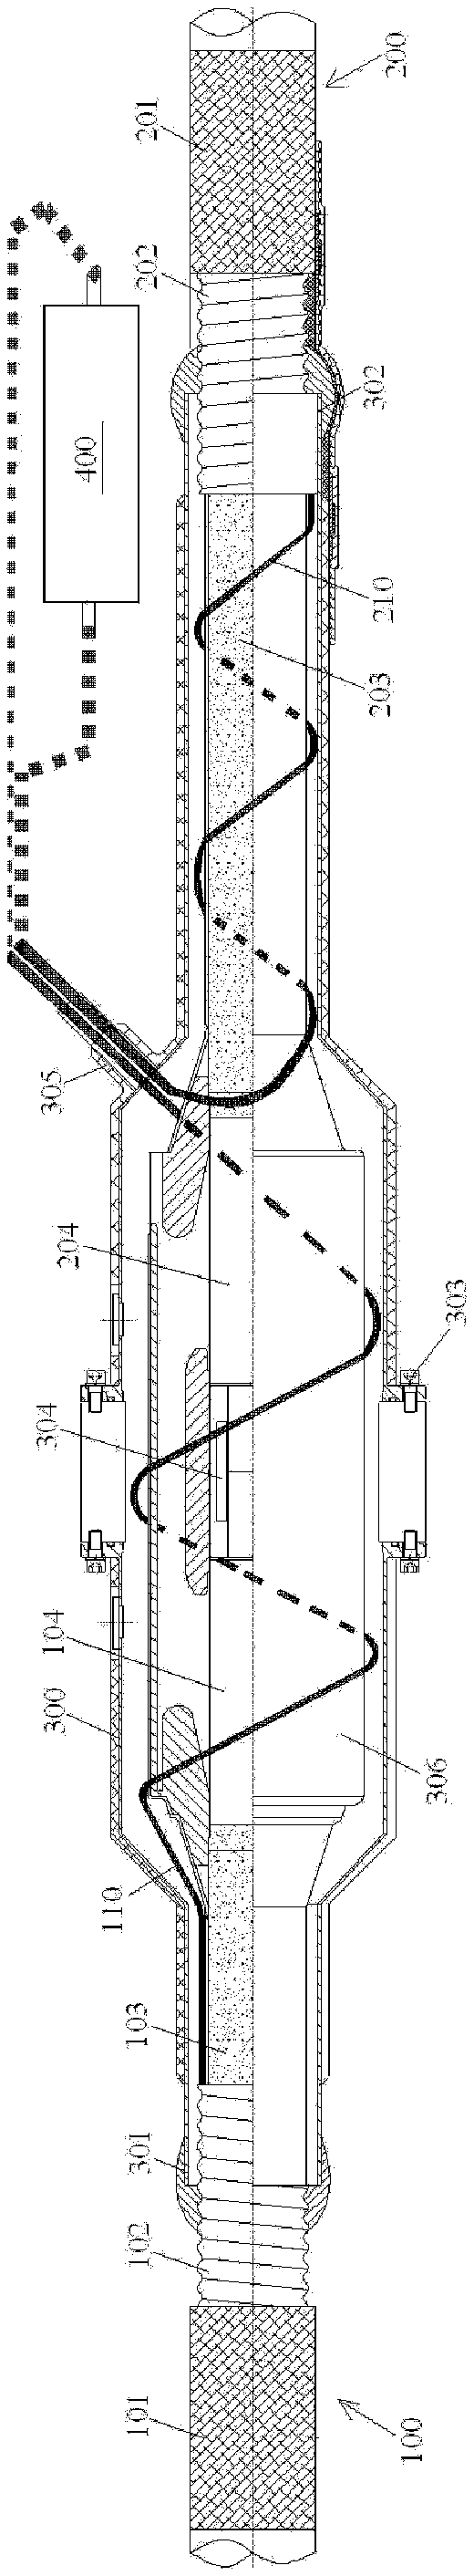 Photoelectric composite cable connecting device